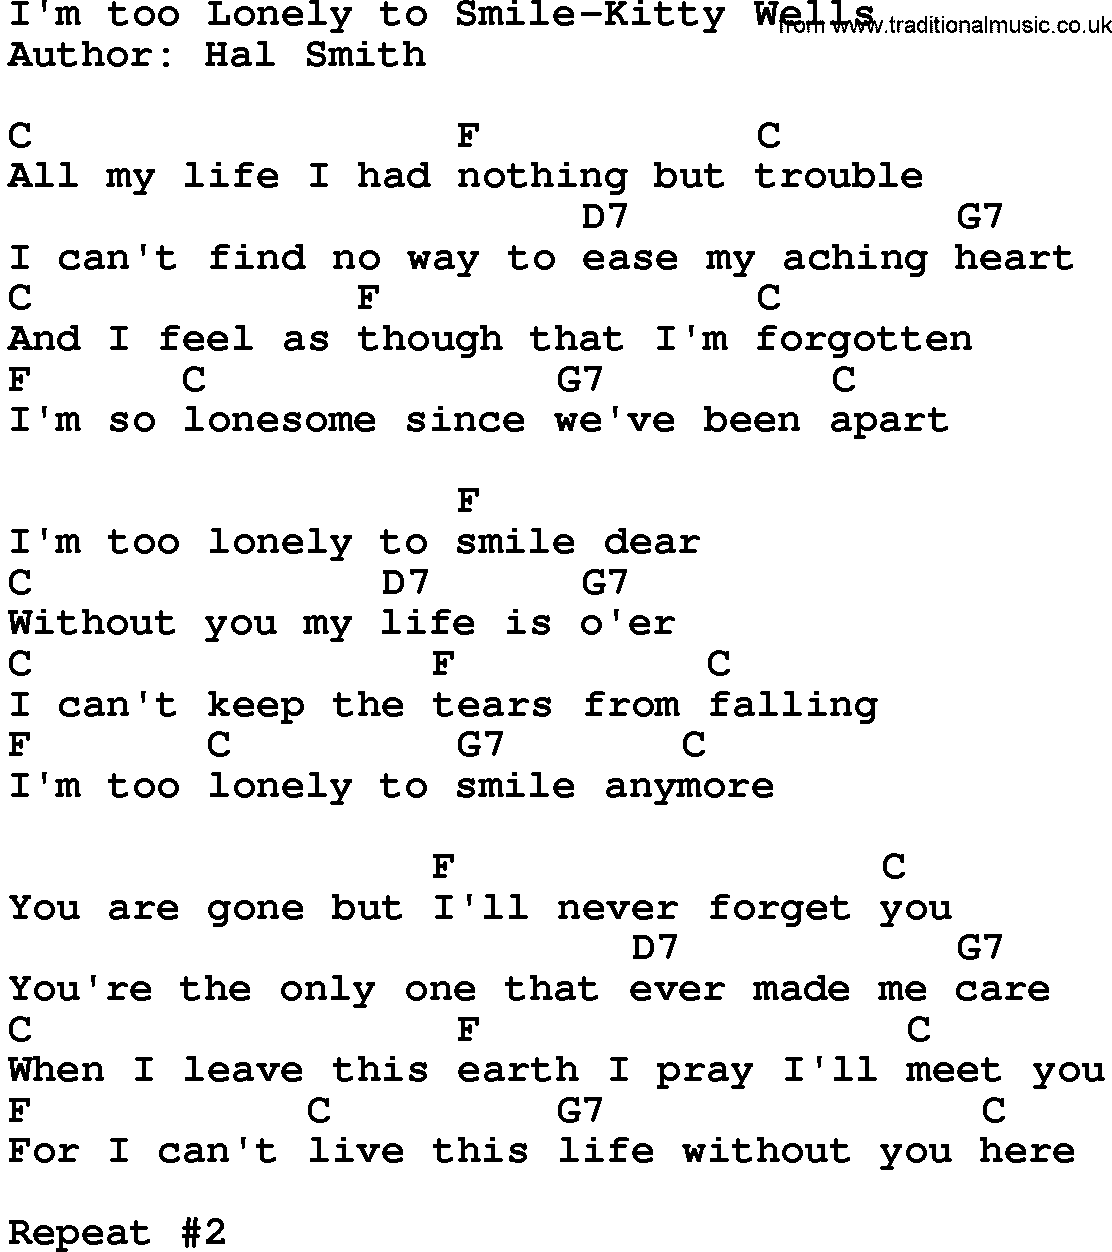 Country music song: I'm Too Lonely To Smile-Kitty Wells lyrics and chords